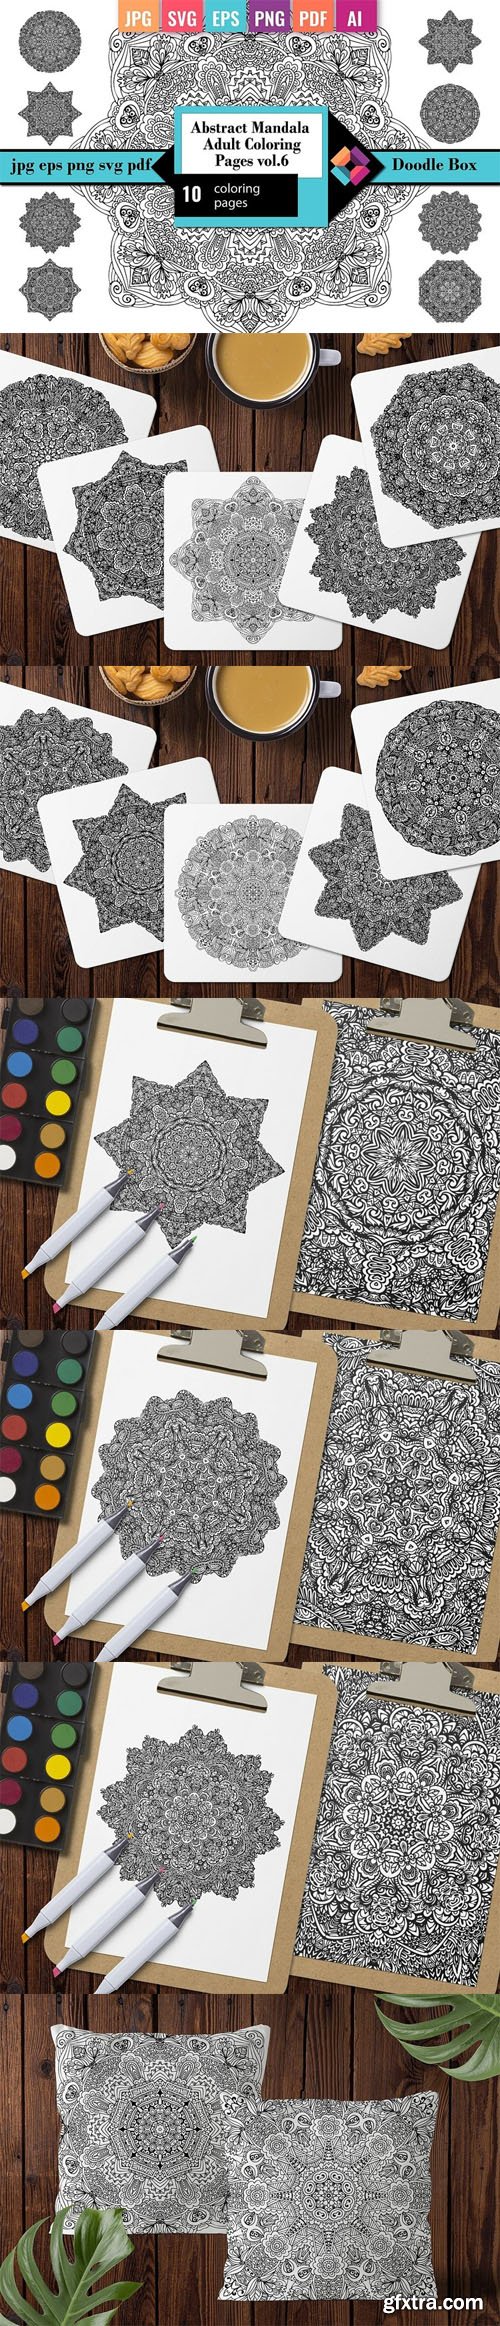 Antistress Mandala Adult Coloring Pages - 10 Coloring Pages